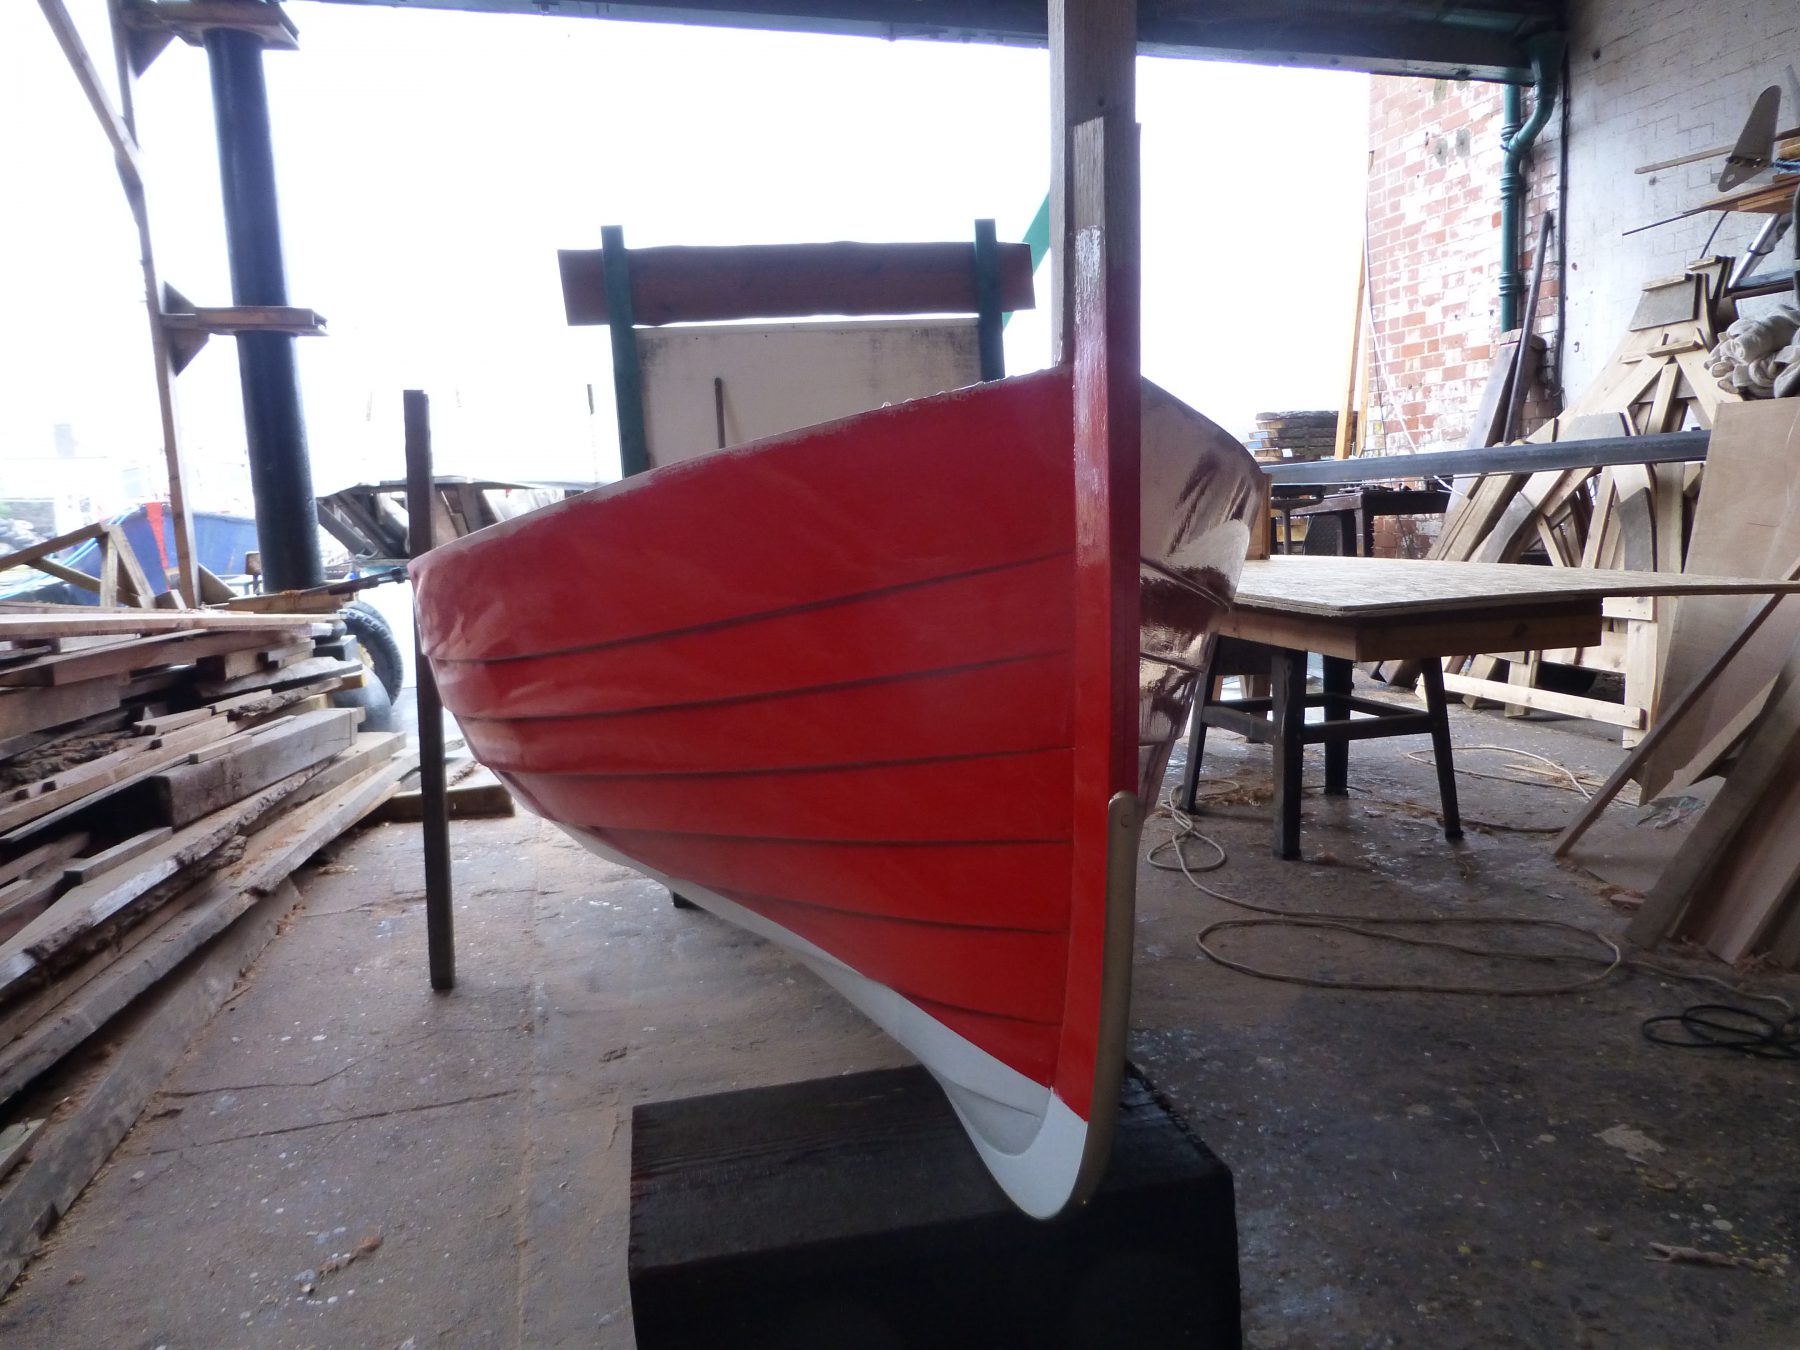 Building “Willow” the Guillemot dinghy using marine epoxy